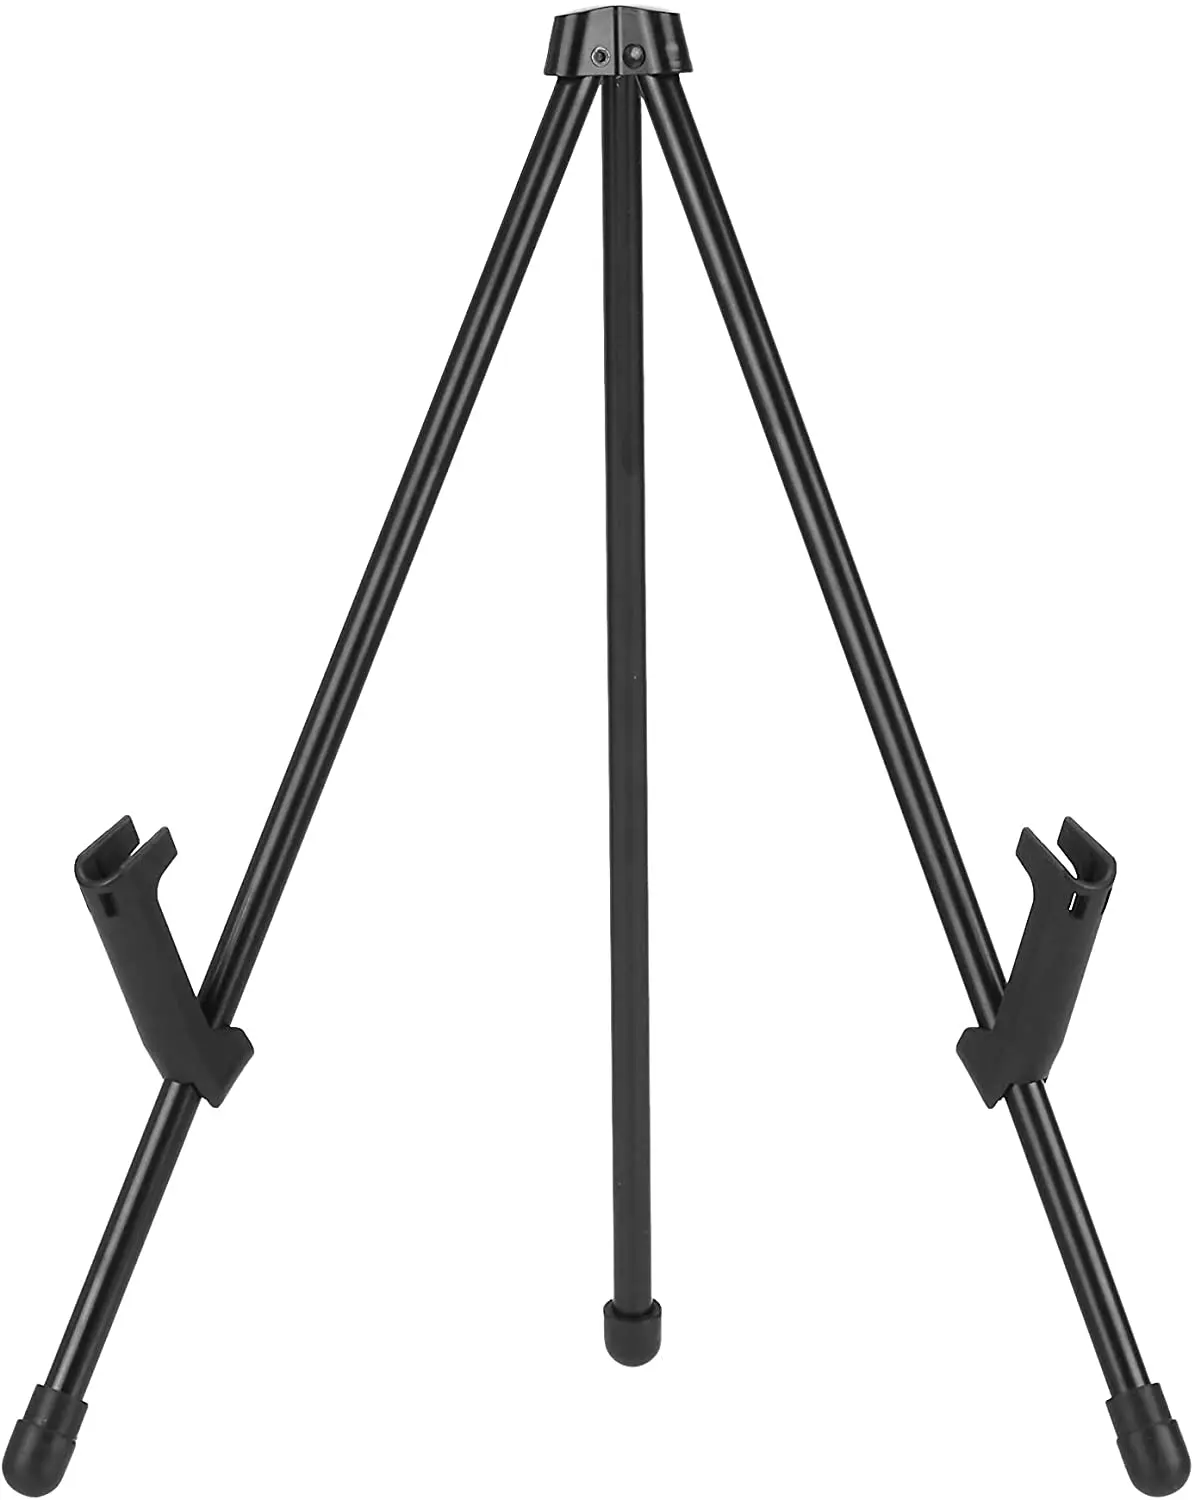 Tabletop Instant Easel – Treppiedi, Supports 5 libbre